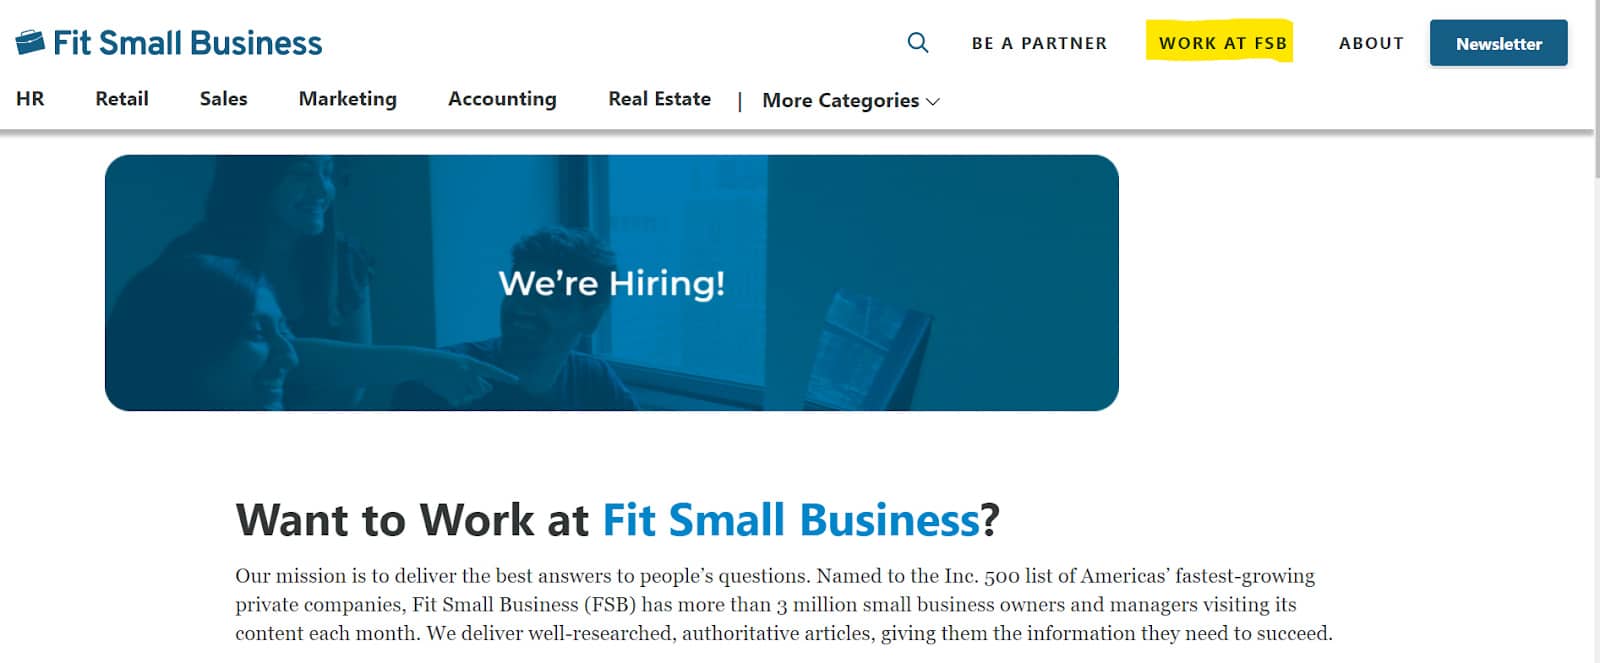 Fit Small Business career page.